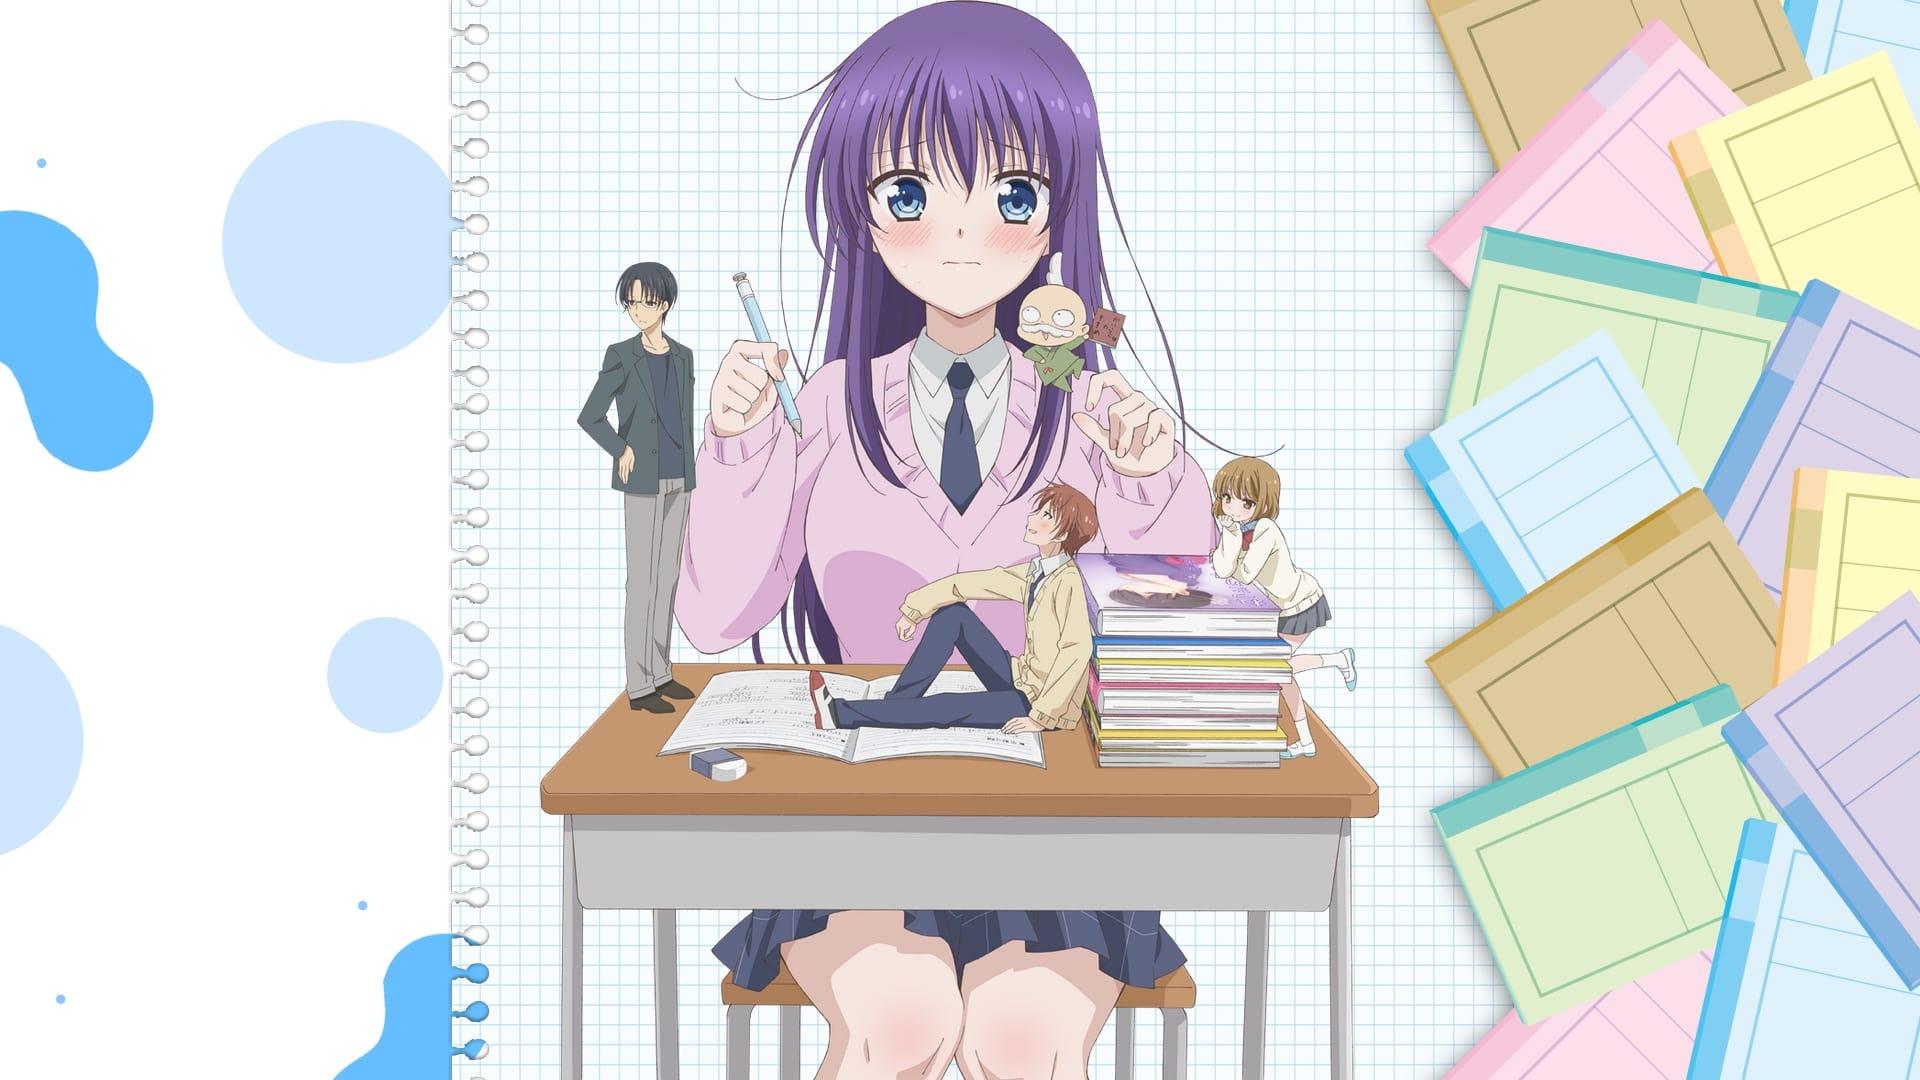 Ao-chan Can't Study! backdrop